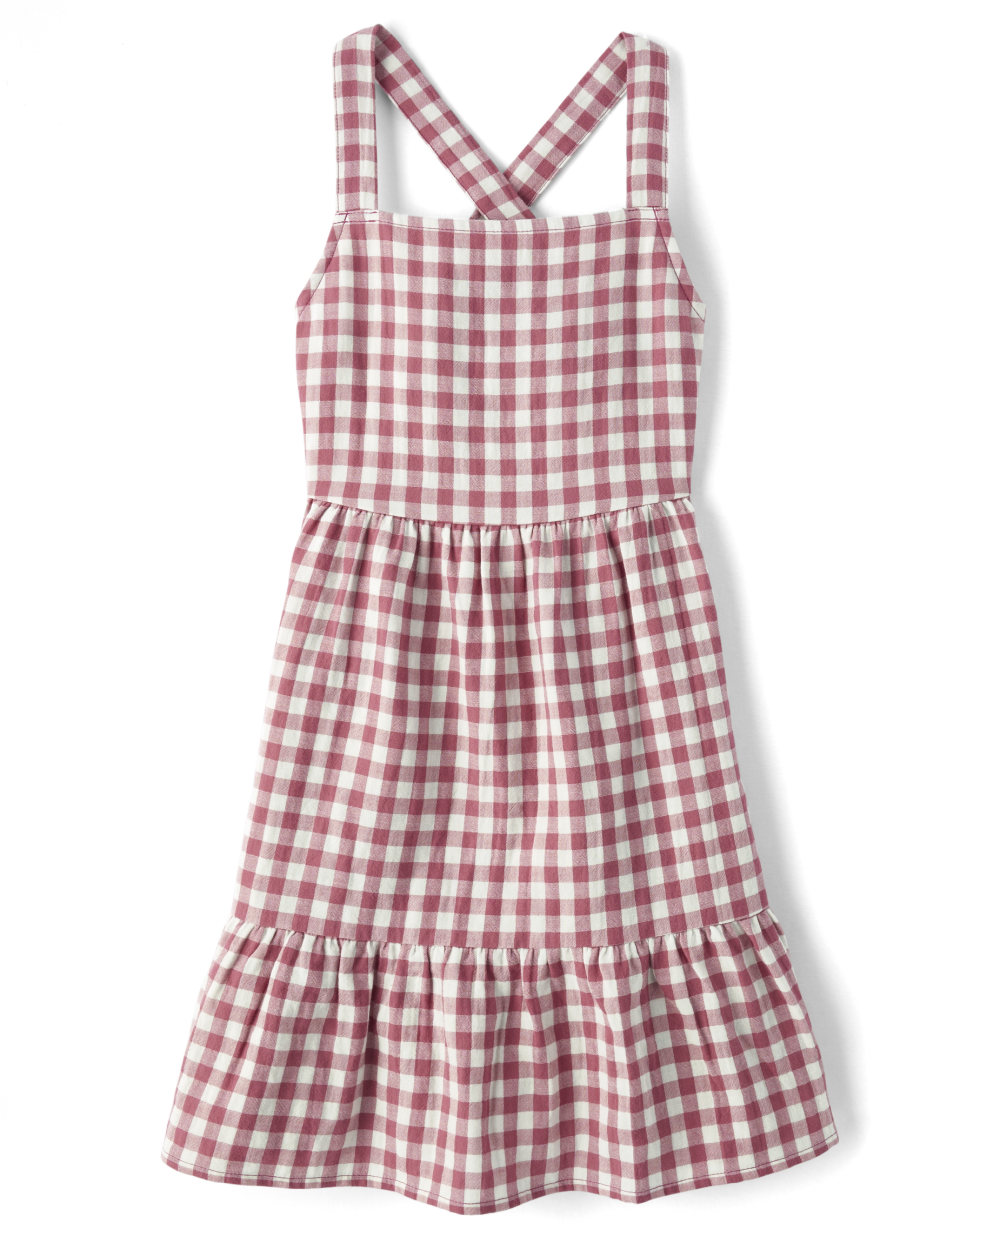 Girls Checkered Gingham Print Above the Knee Sleeveless Square Neck Dress With Ruffles